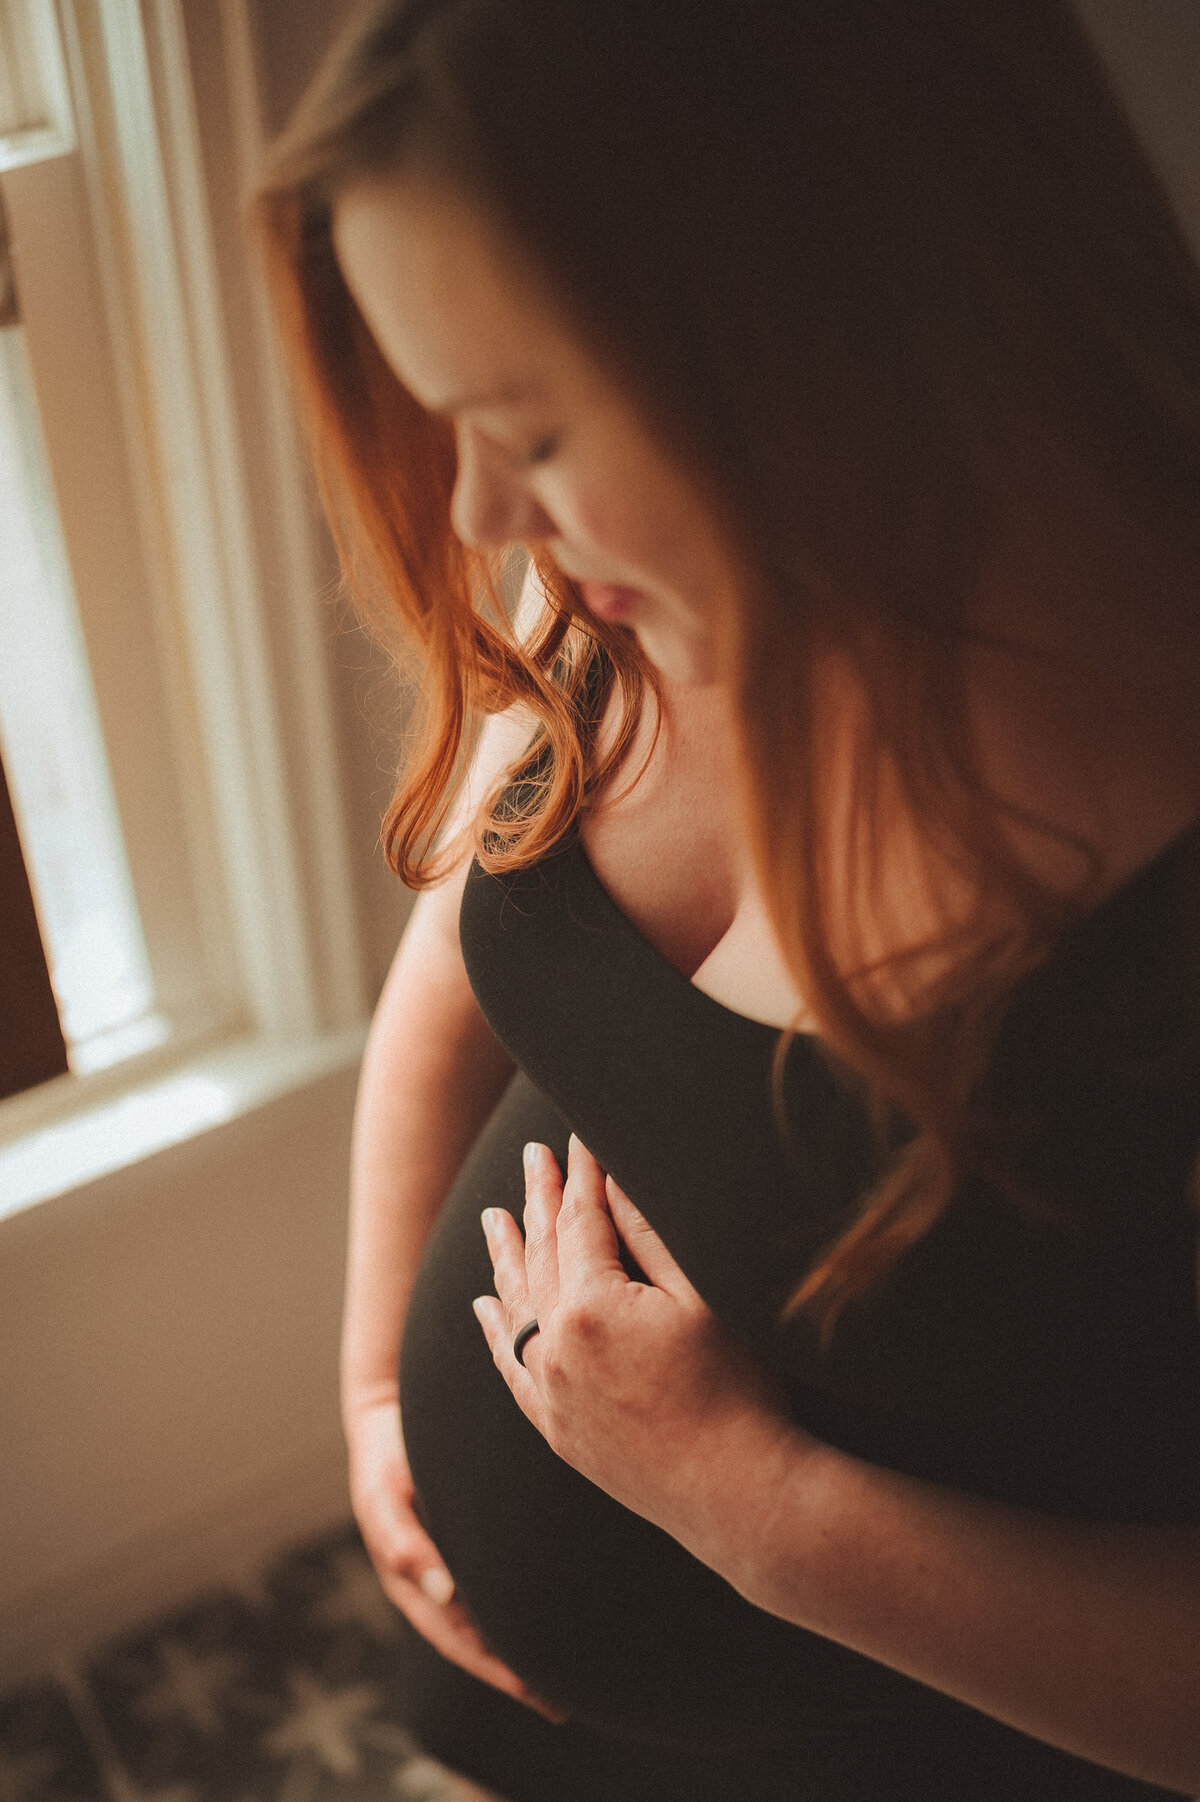 Experience the magic of maternity in the warmth of your home. Shannon Kathleen Photography captures the glow of anticipation. Book your in-home maternity session now